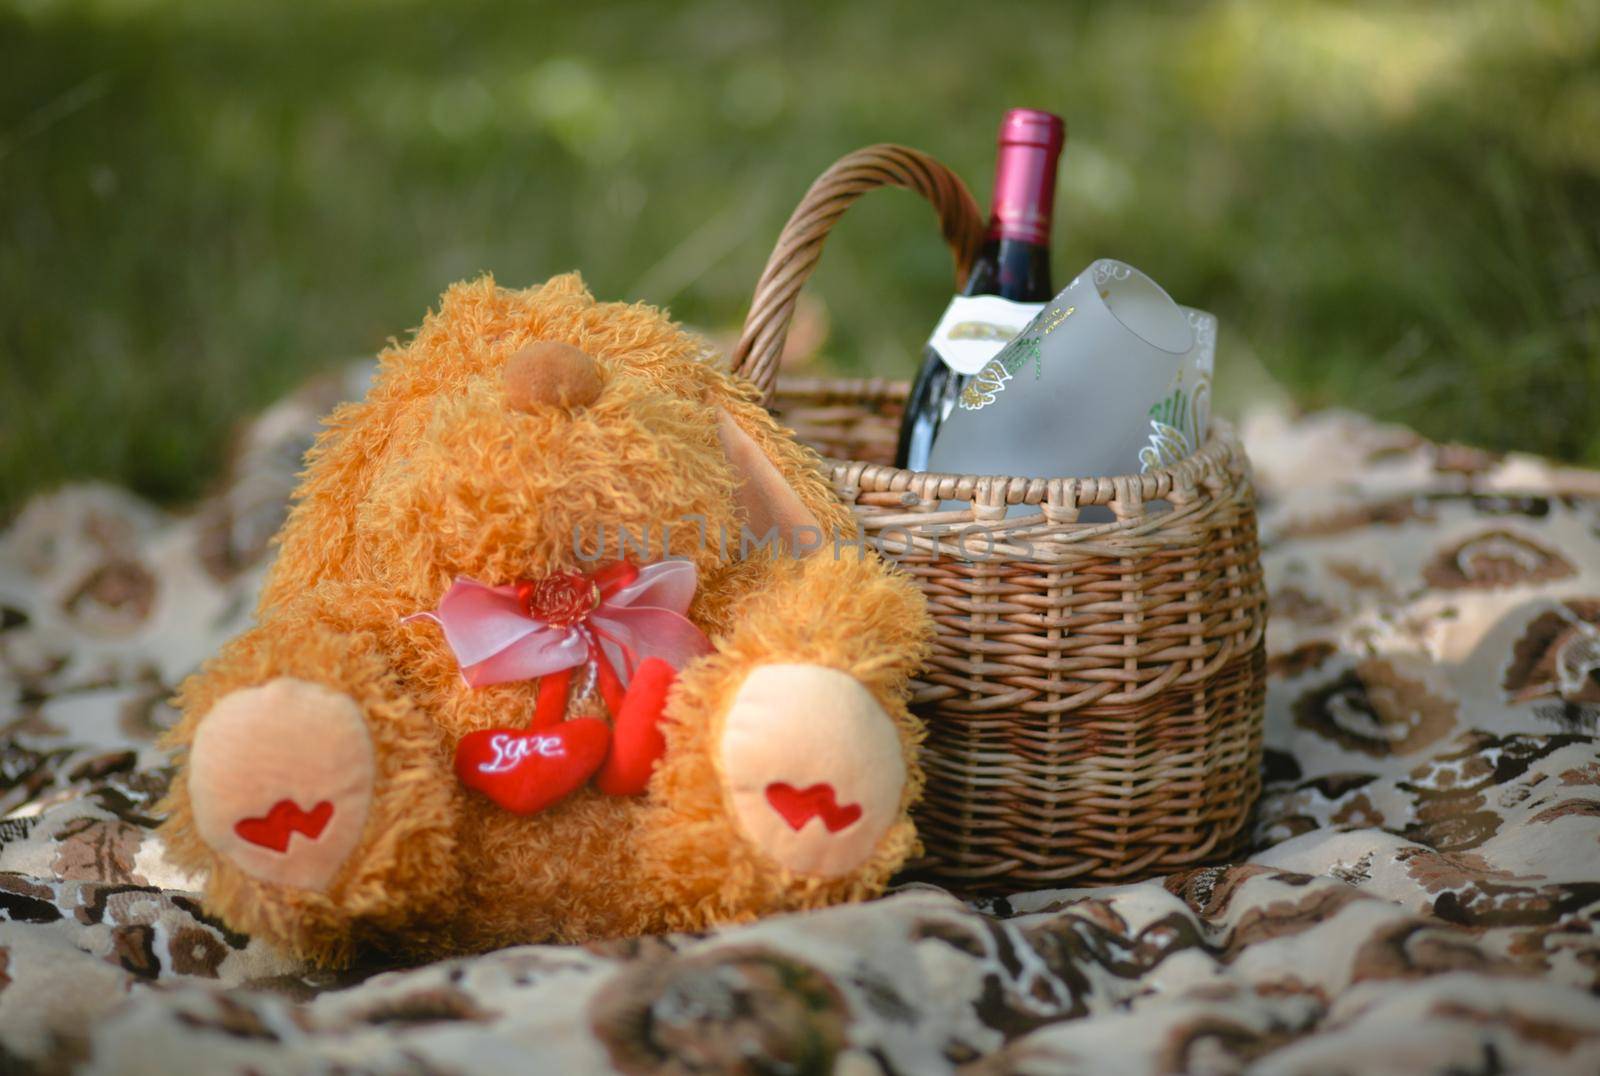 Picnic basket. A bottle of wine and a Teddy bear